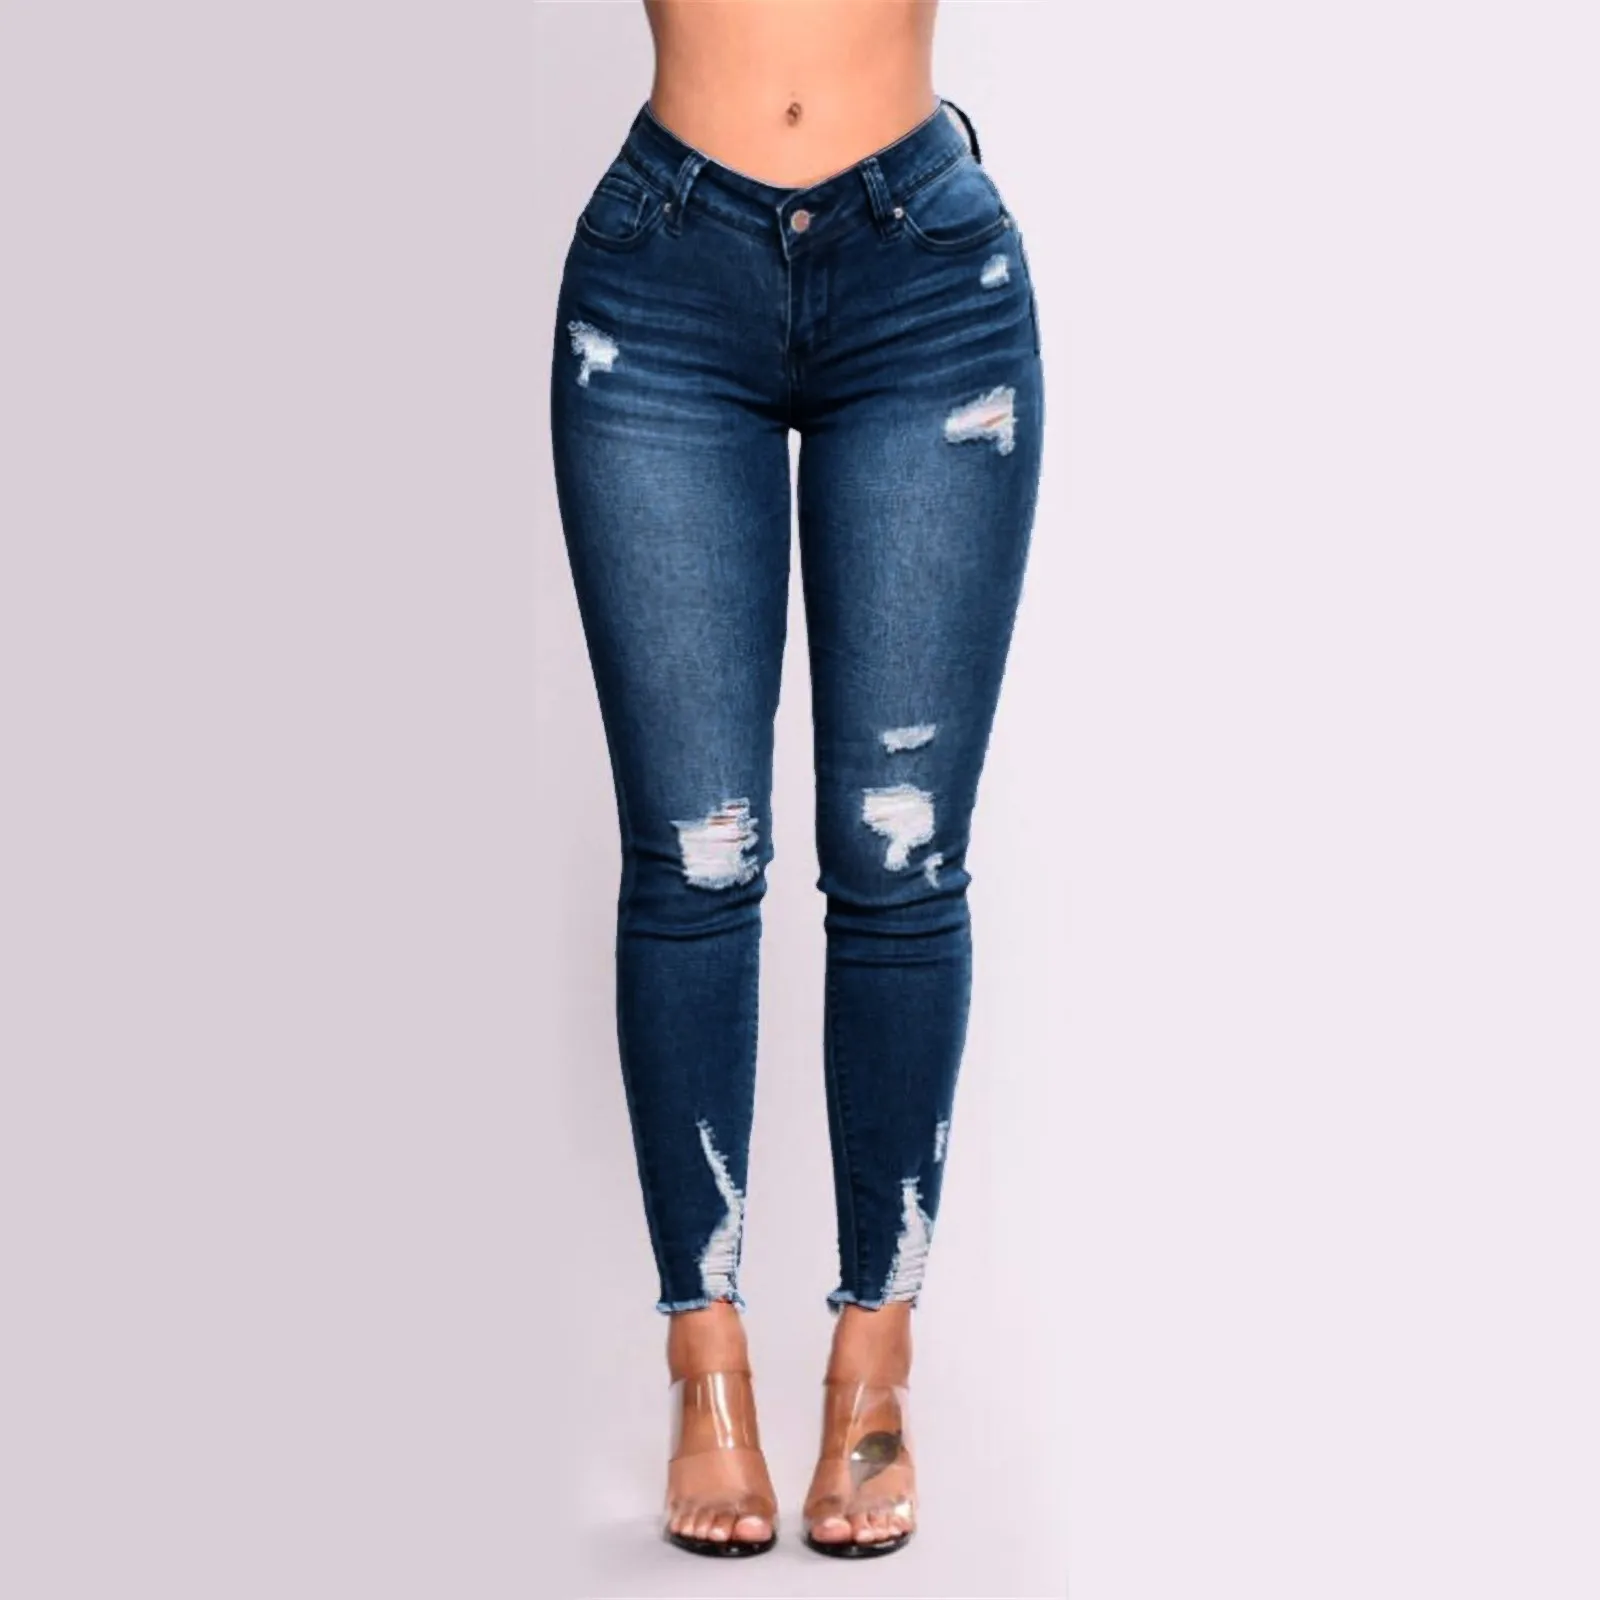 

Women's Butt Lifting Skinny Denim Jeans High Waist Pencil Jean Stretchy Distressed Slim Trousers Destroyed Ripped Jean Oversized